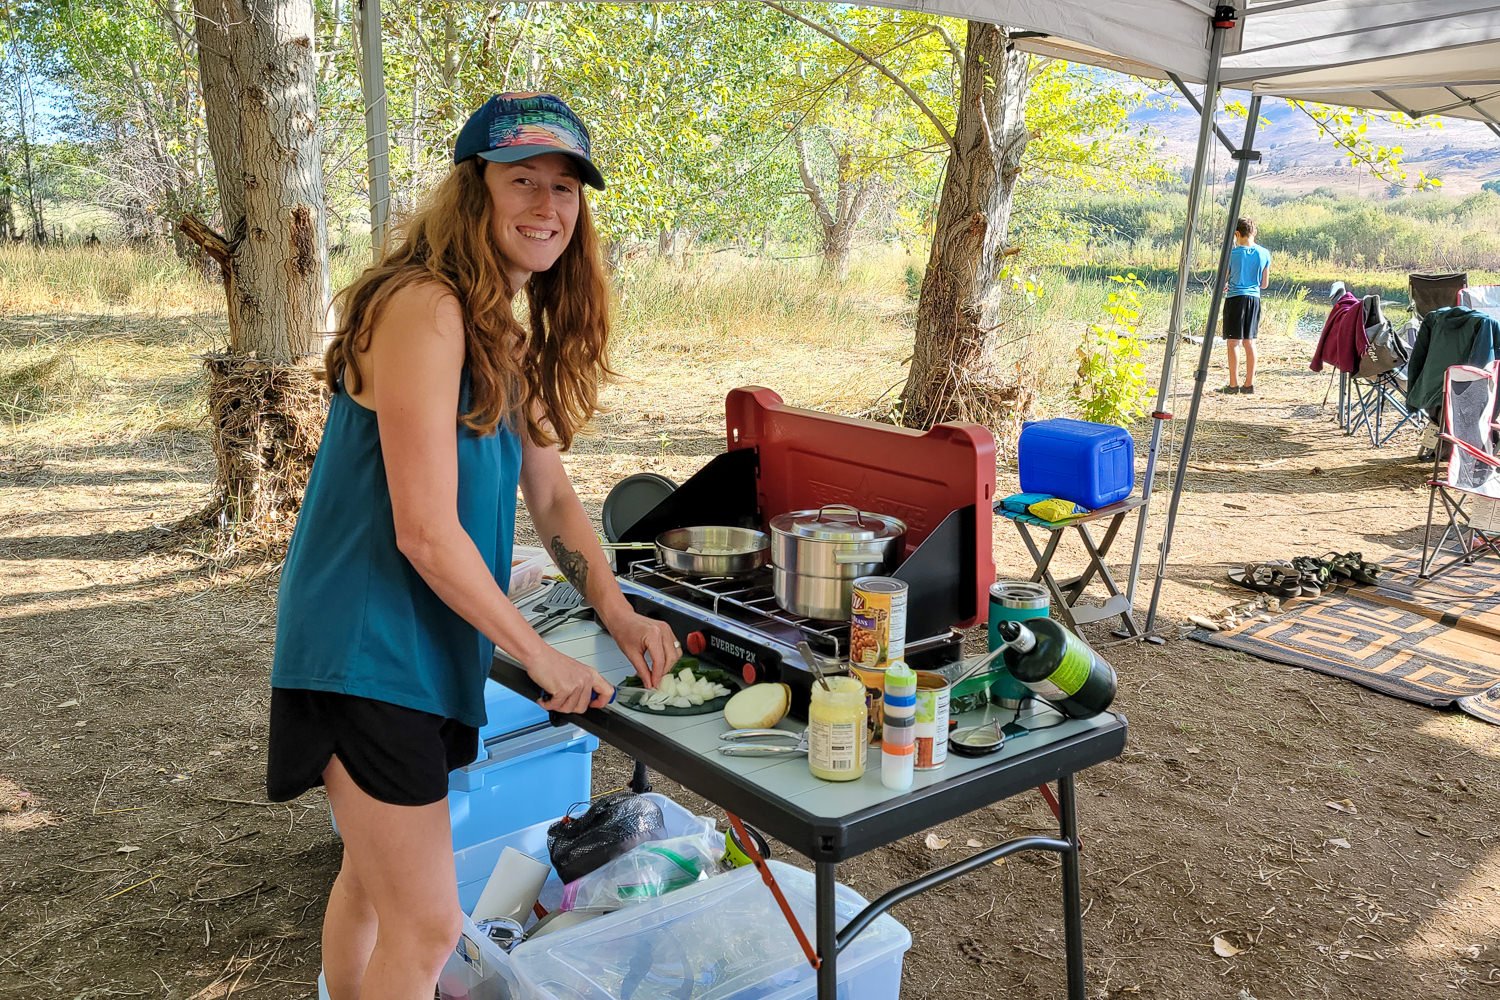 A woman chopping onions on a camping table